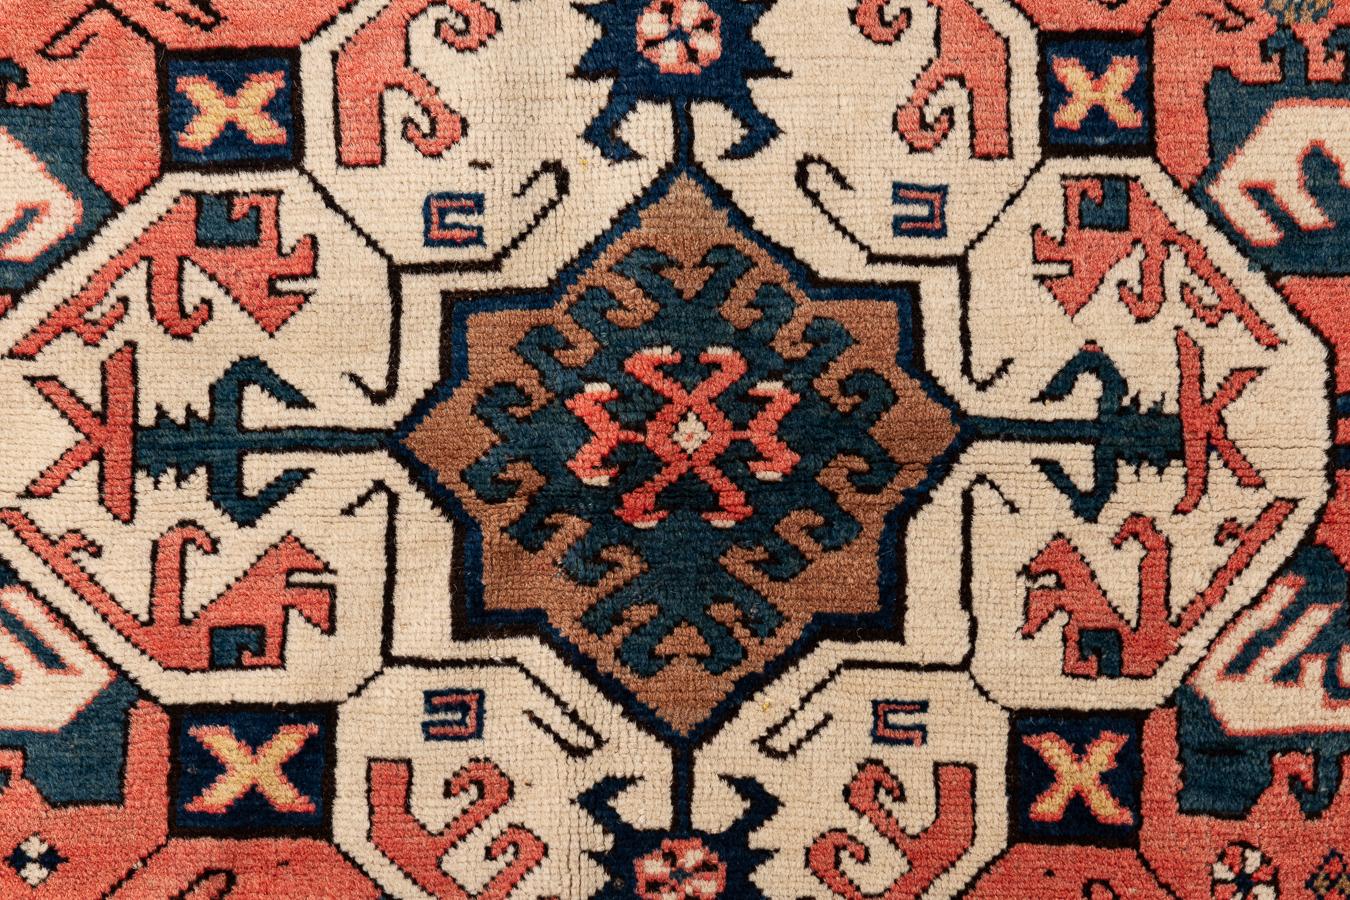 Kassim Ushag – Karabagh, South Caucasus

This stunning Kassim Ushag is unique due to the use of vibrant colours, which are rarely found in this type of rug. With an asymmetrical geometric design, it has an octagonal medallion in ivory colour. The